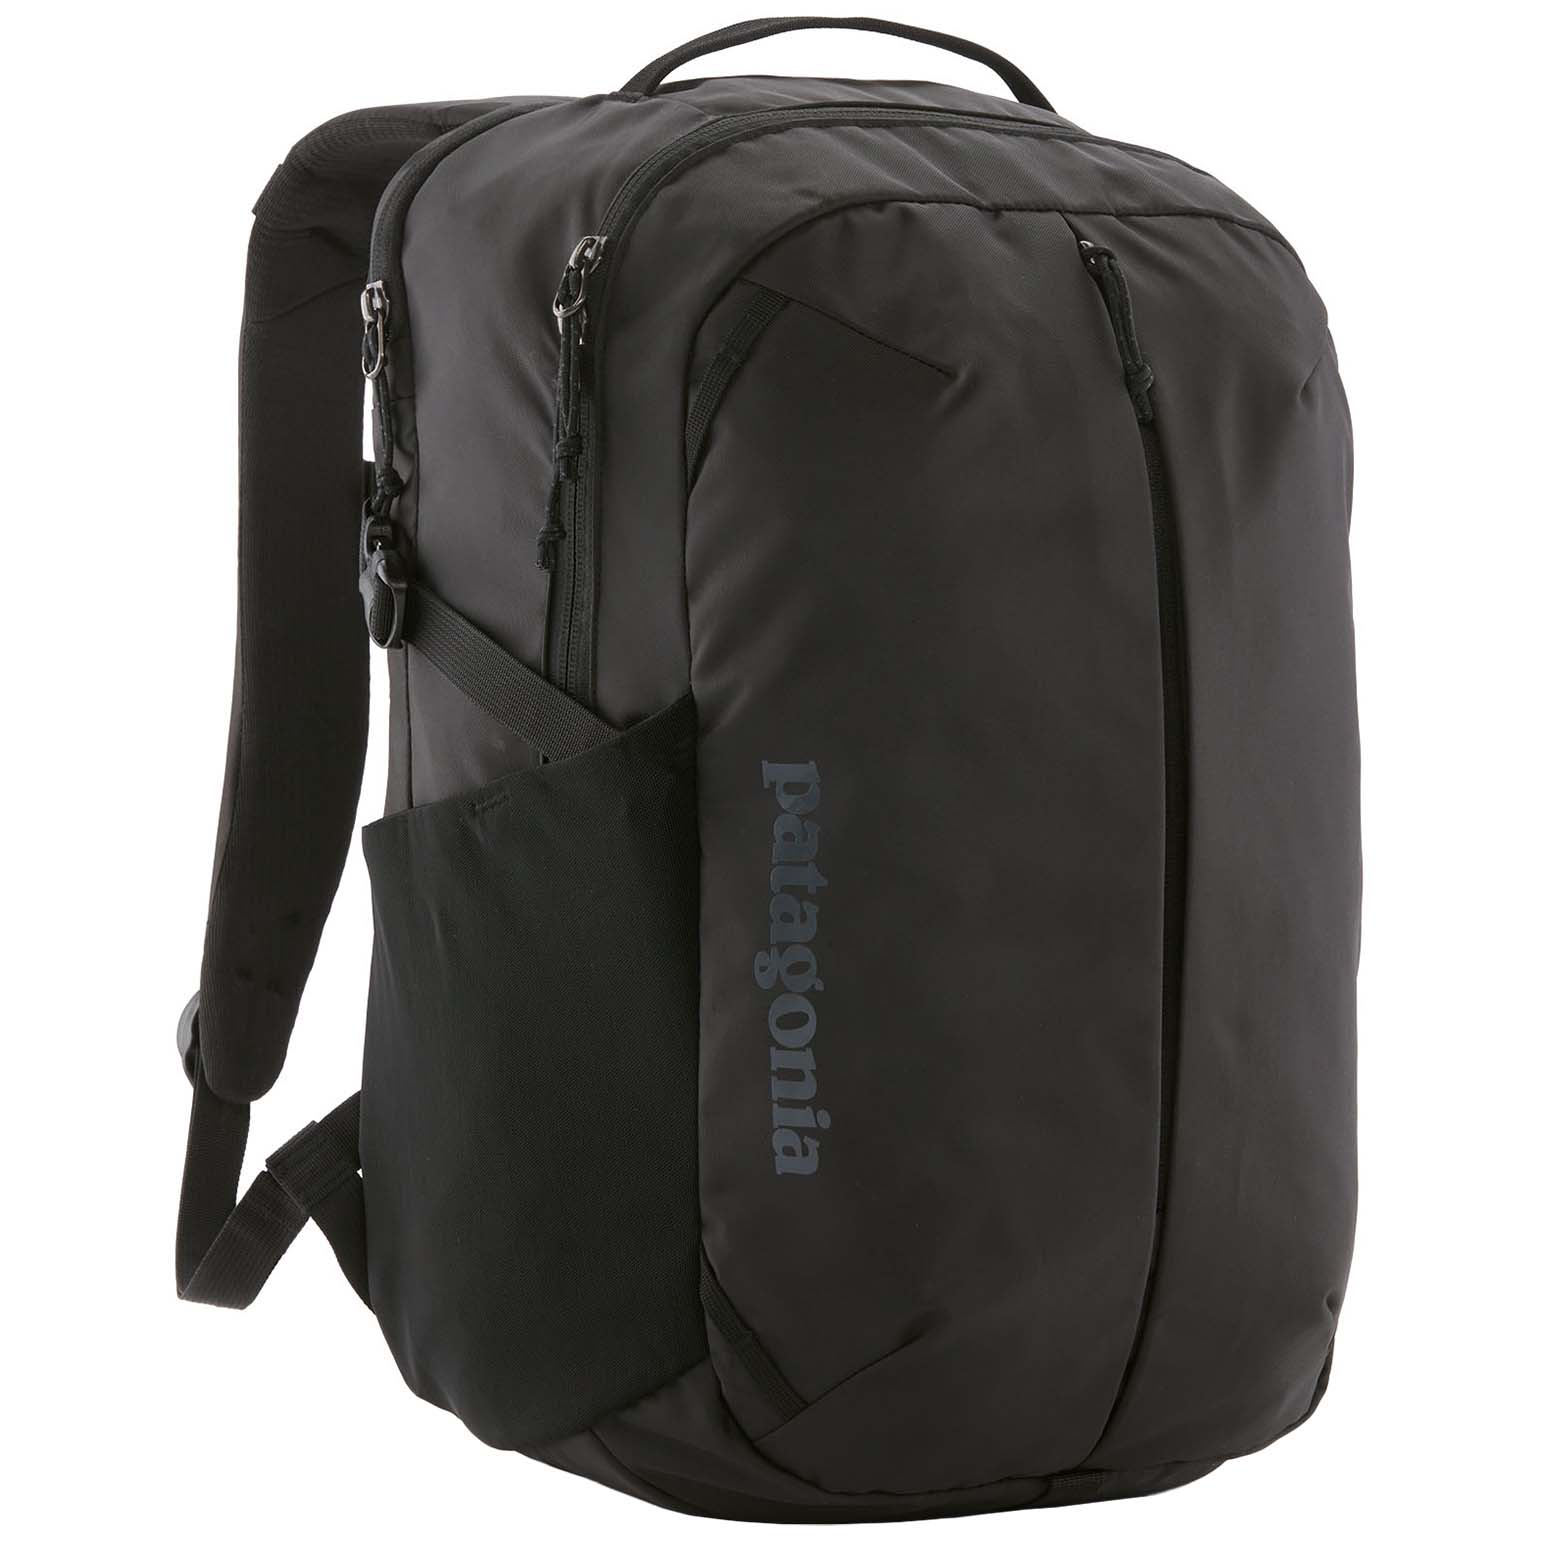 Patagonia Refugio Day Pack 26 Everyday Backpack